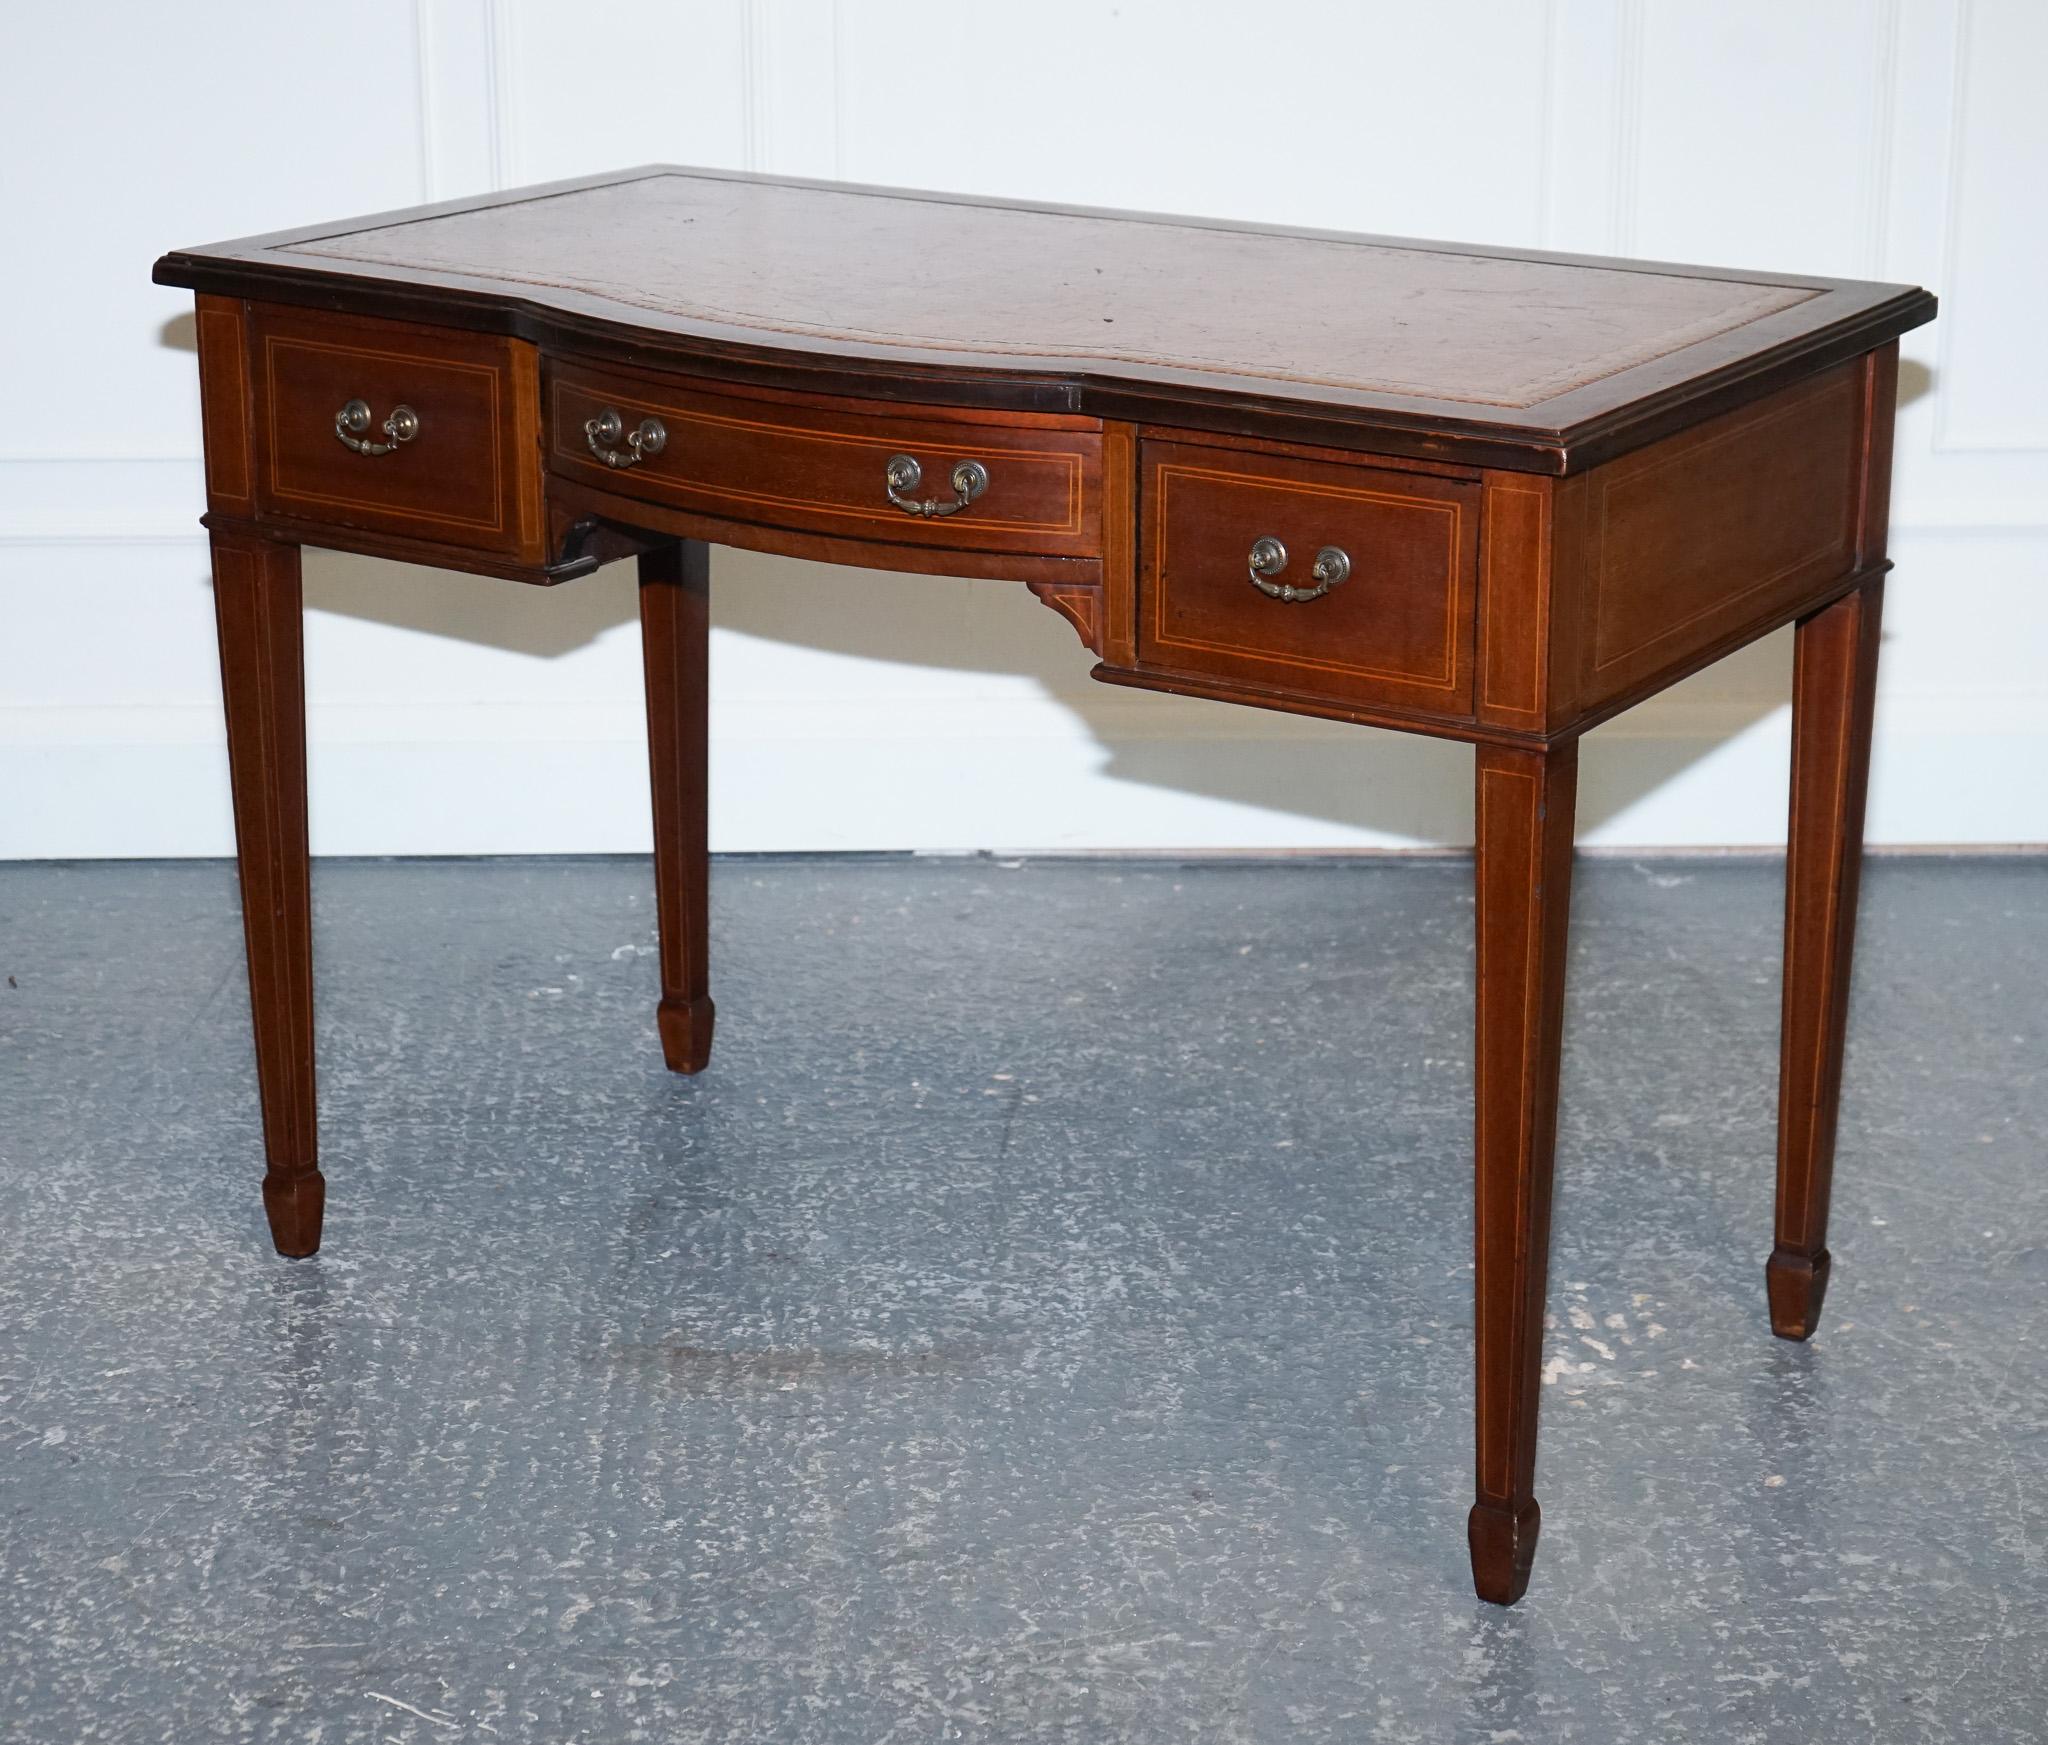 British Edwardian 1880s Stamped Maple & Co Brown Leather Sheraton Writing Desk Table For Sale